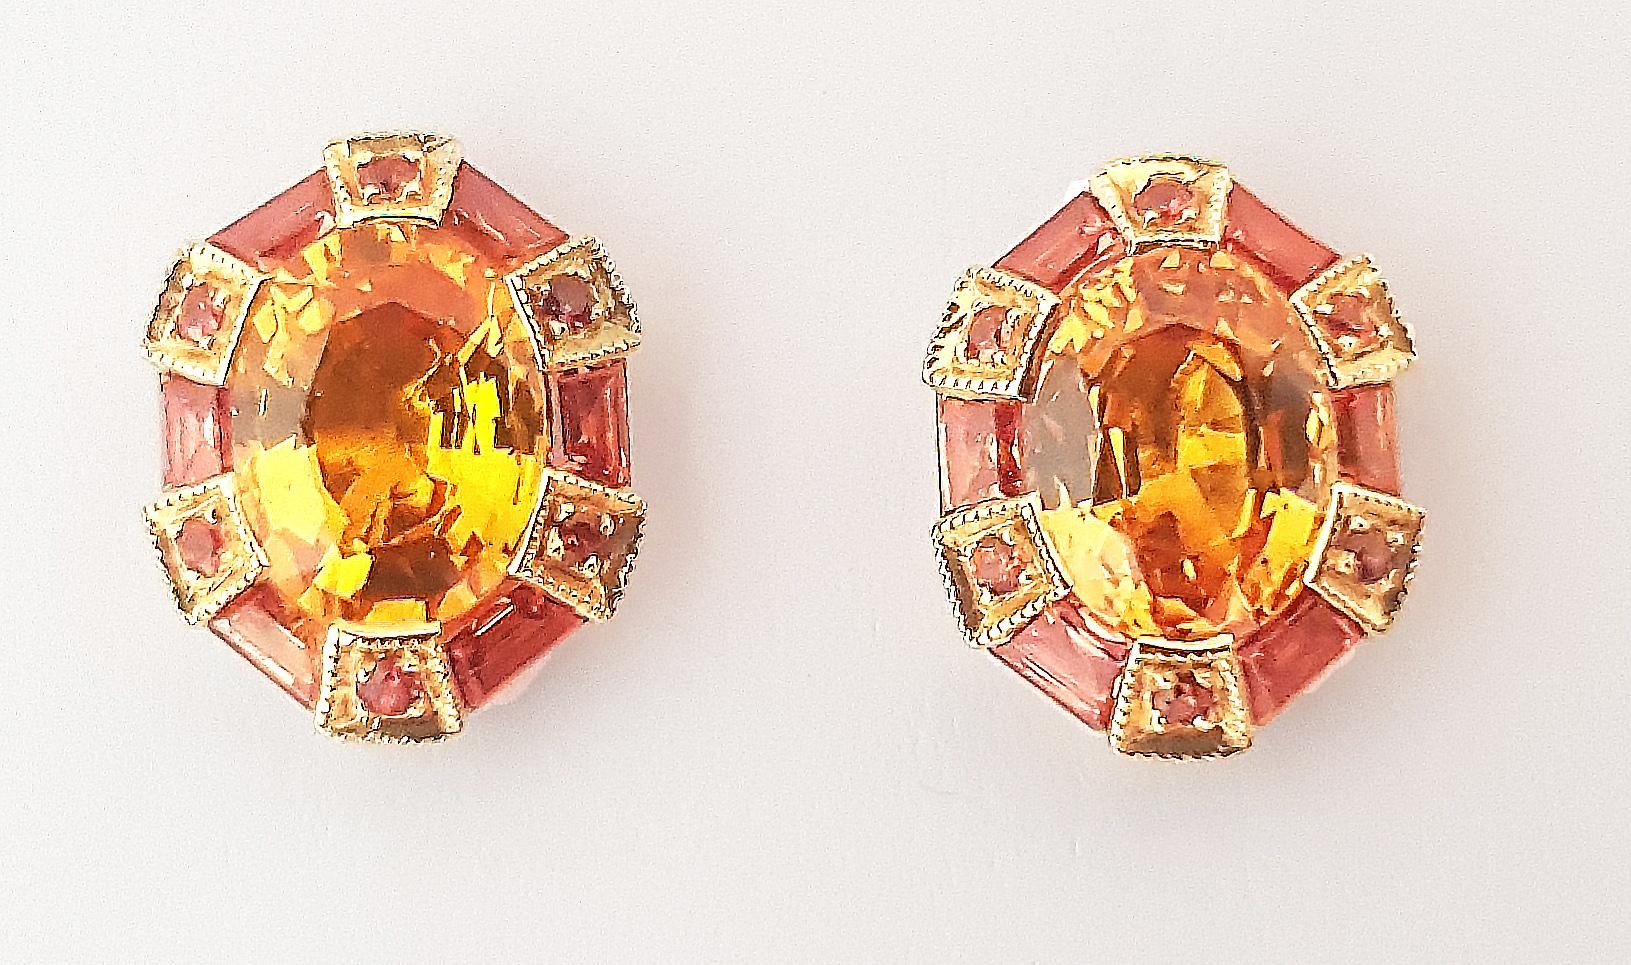 Yellow Sapphire 3.58 carats and Orange Sapphire 2.10 carats Earrings set in 18K Gold Settings

Width: 1.0 cm
Length: 1.2 cm
Weight: 4.71 grams

Inspired by the spirit of 